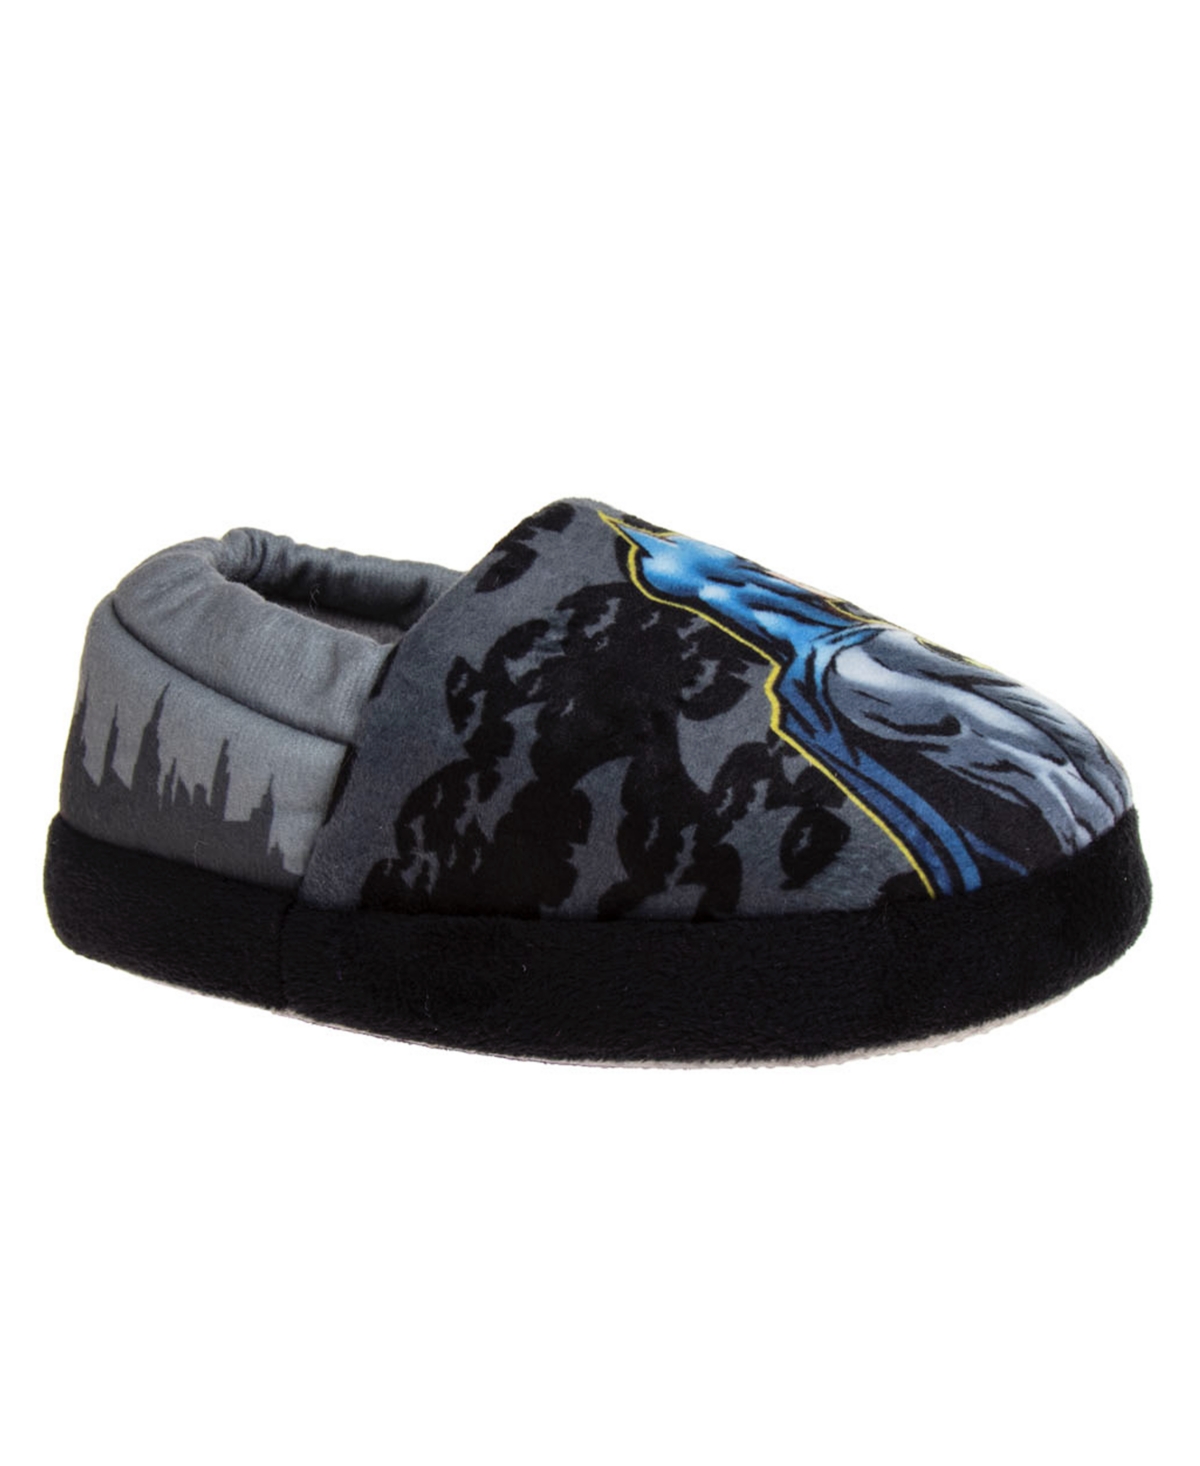 Dc Comics Kids' Toddler Boys Warner Brothers Batman Dual Sizes House Slippers In Black,yellow